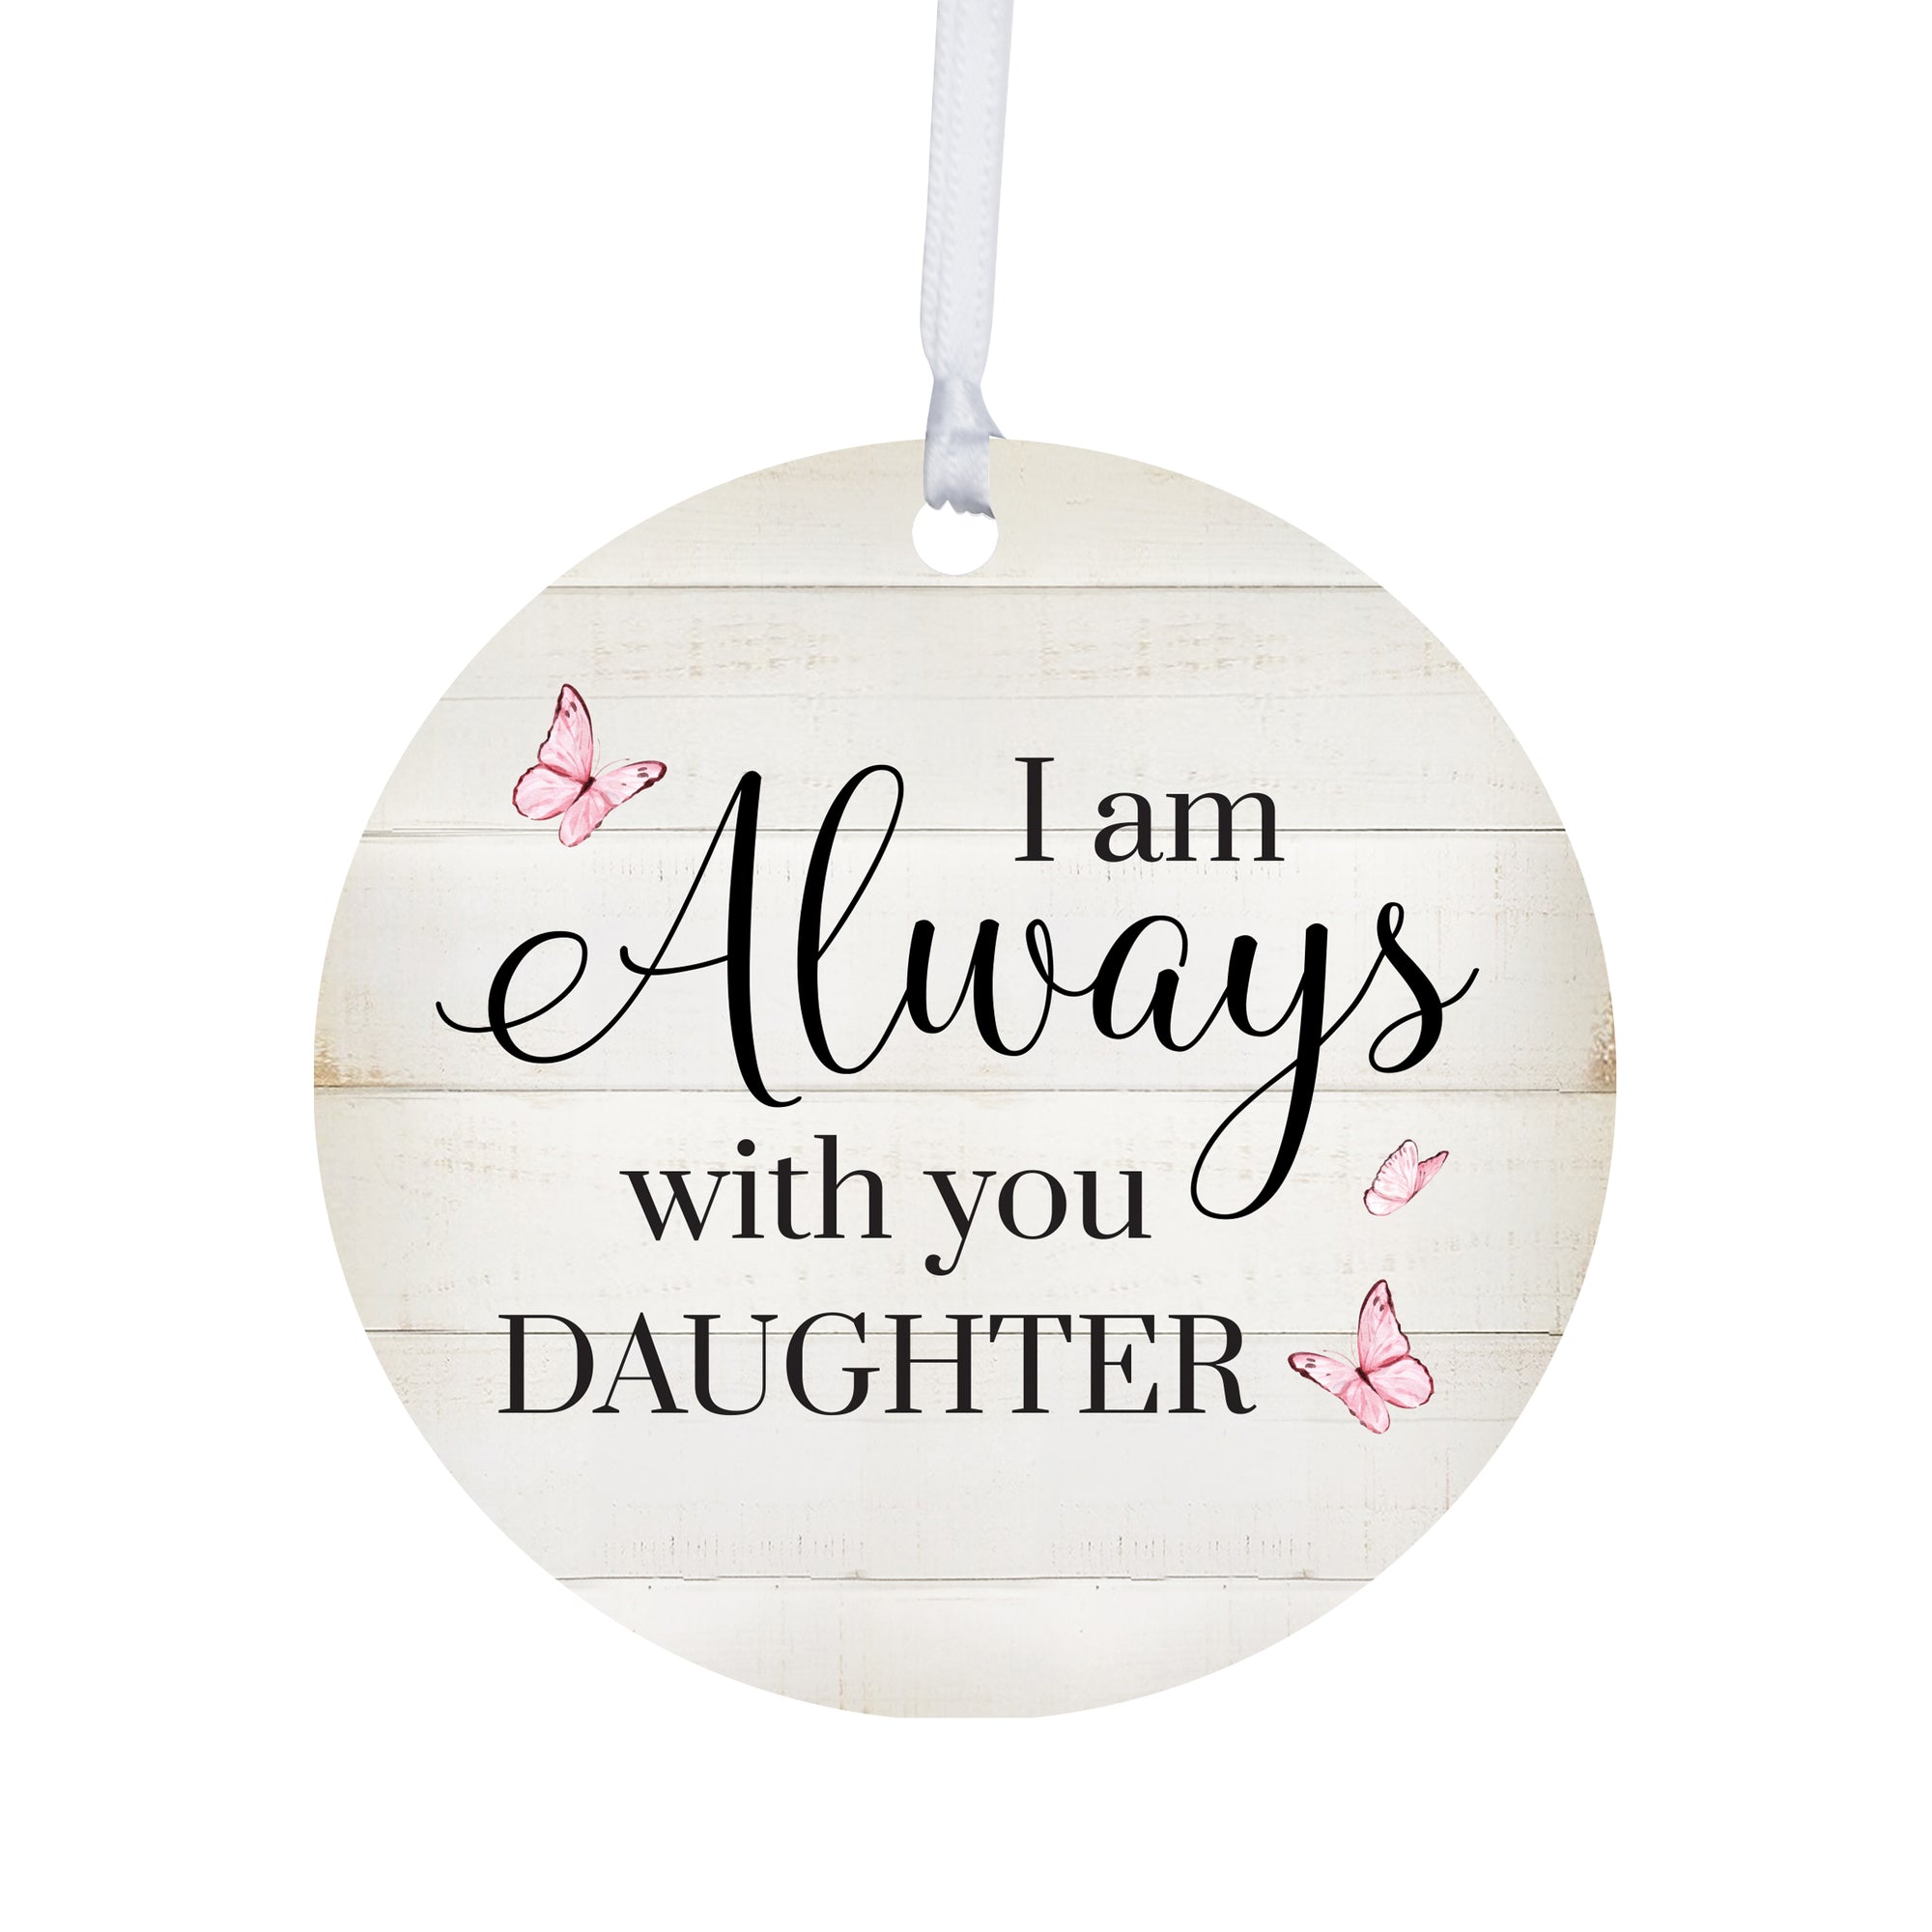 Hanging Memorial Round Ornament for Loss of Loved One – A beautiful tribute and memorial decoration.